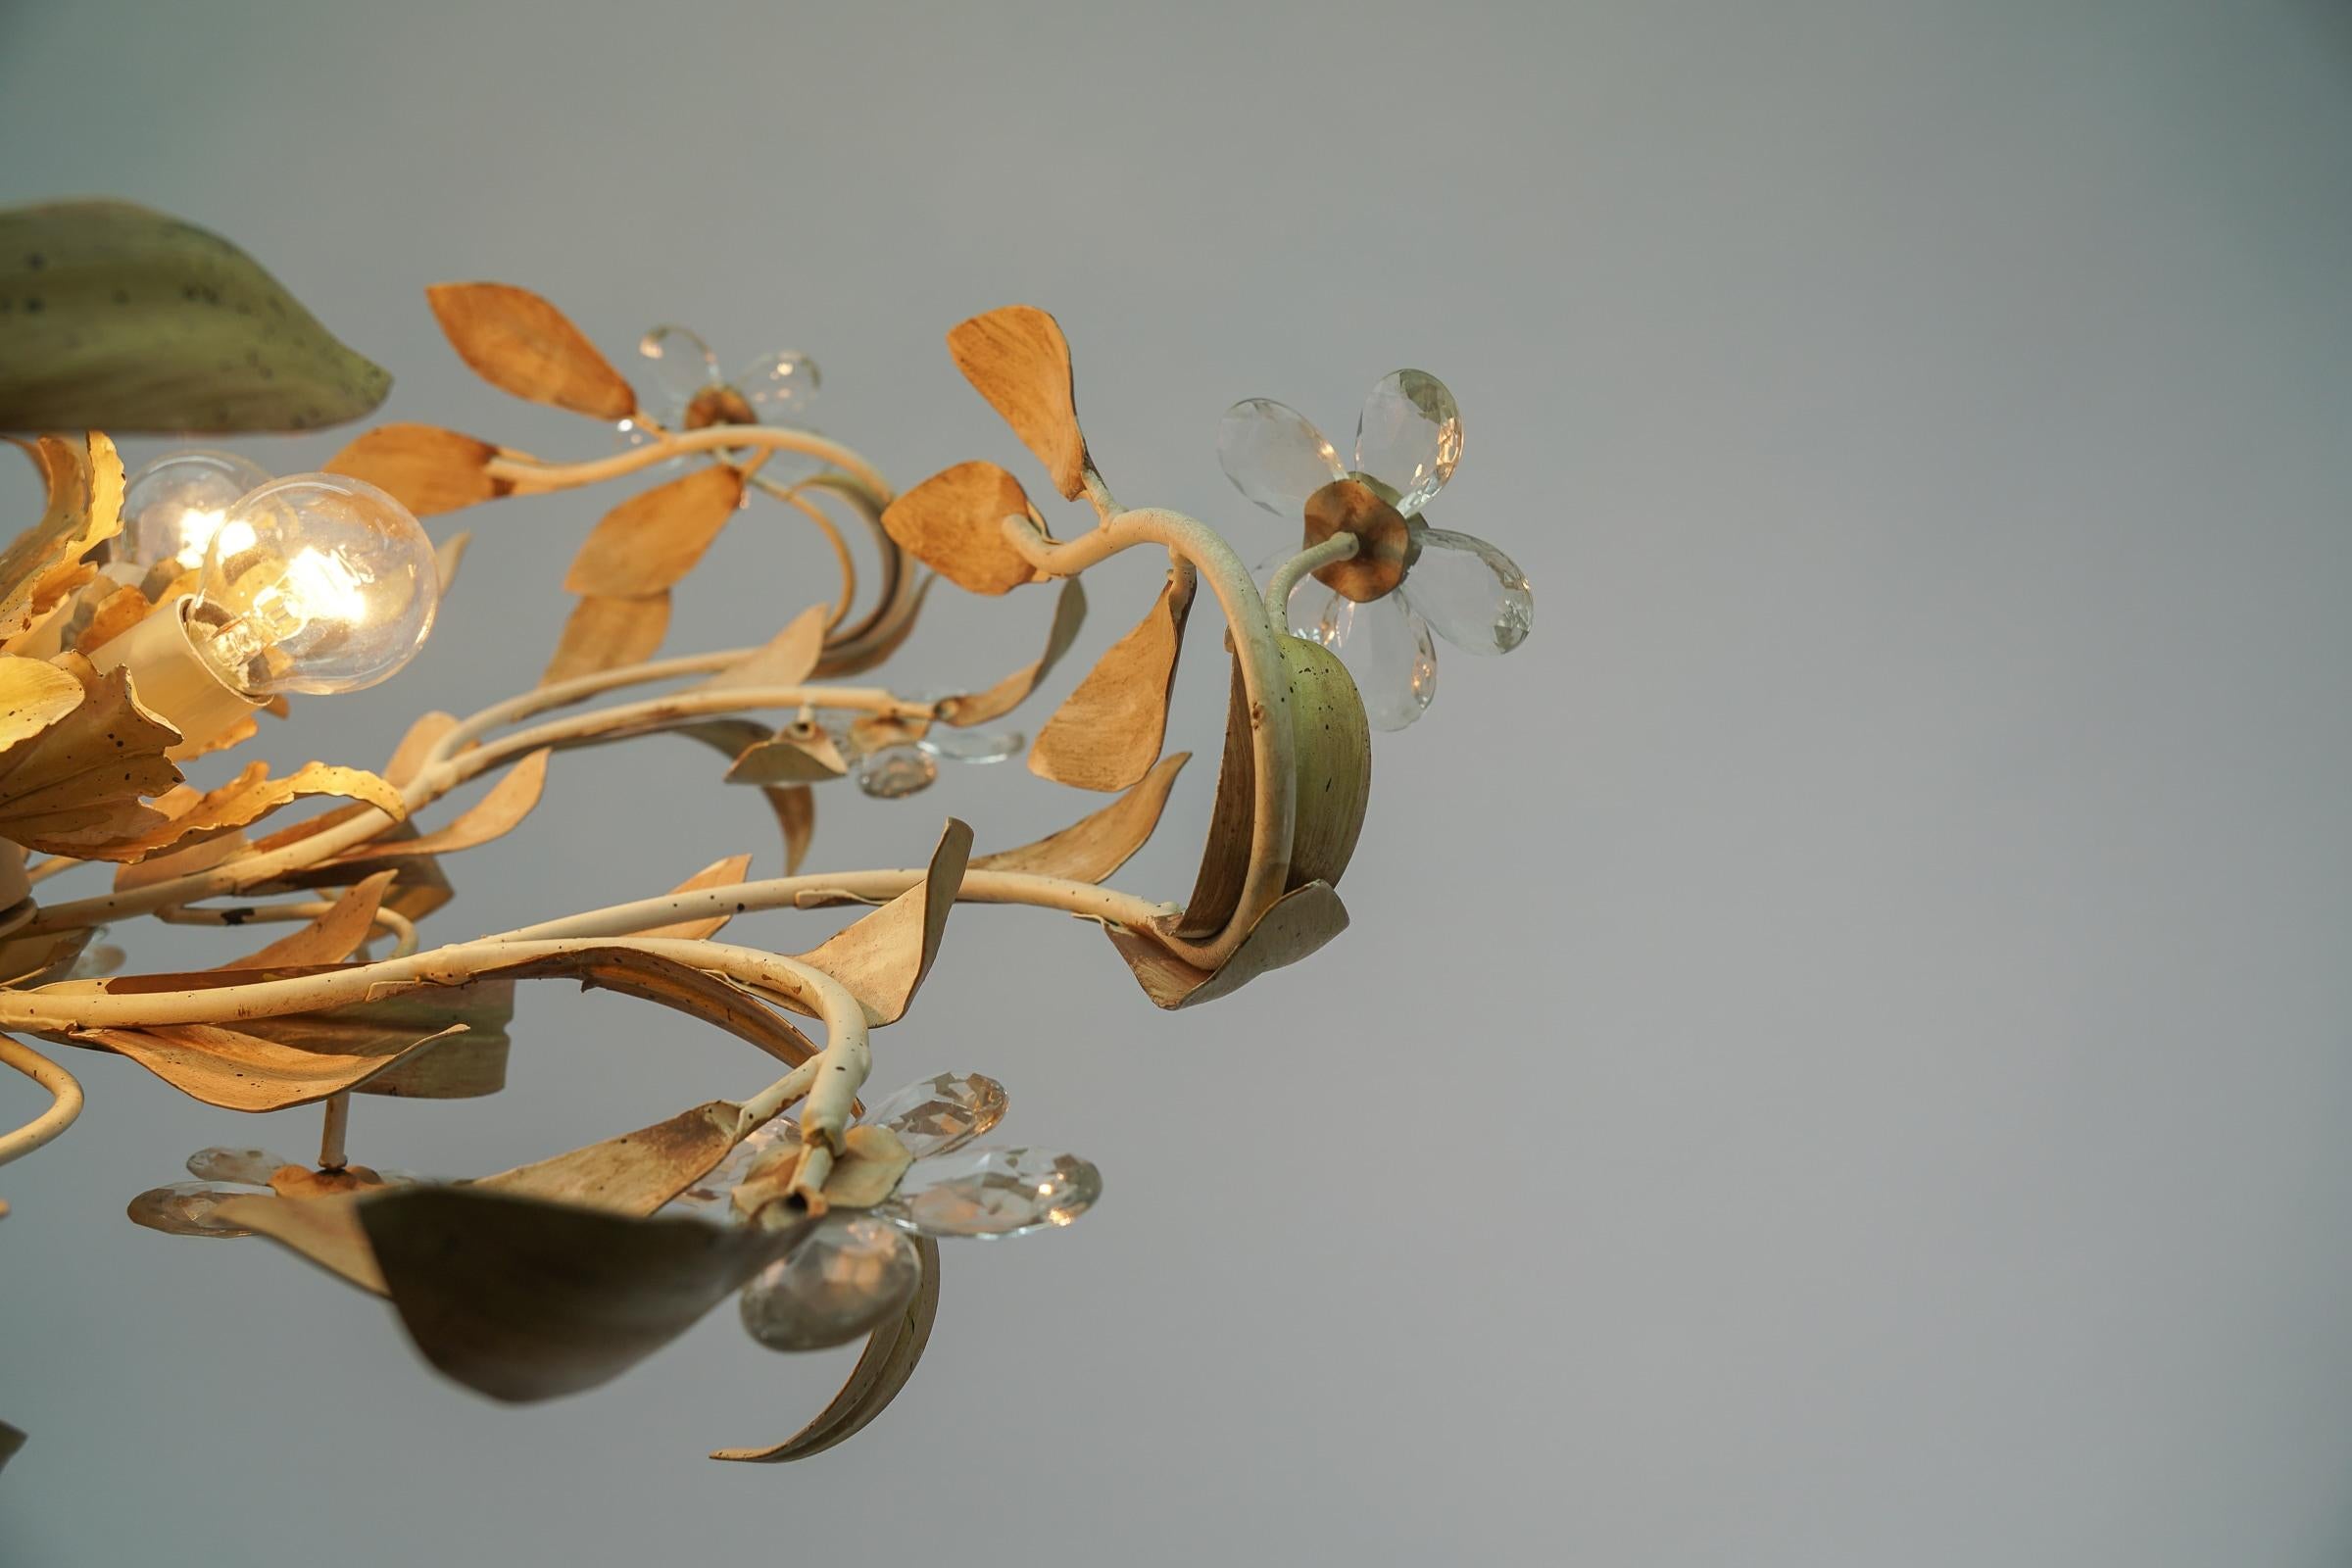 Italian Crystal Glass and Metal Florentine Ceiling Lamp by Banci Firenze, 1960s For Sale 1